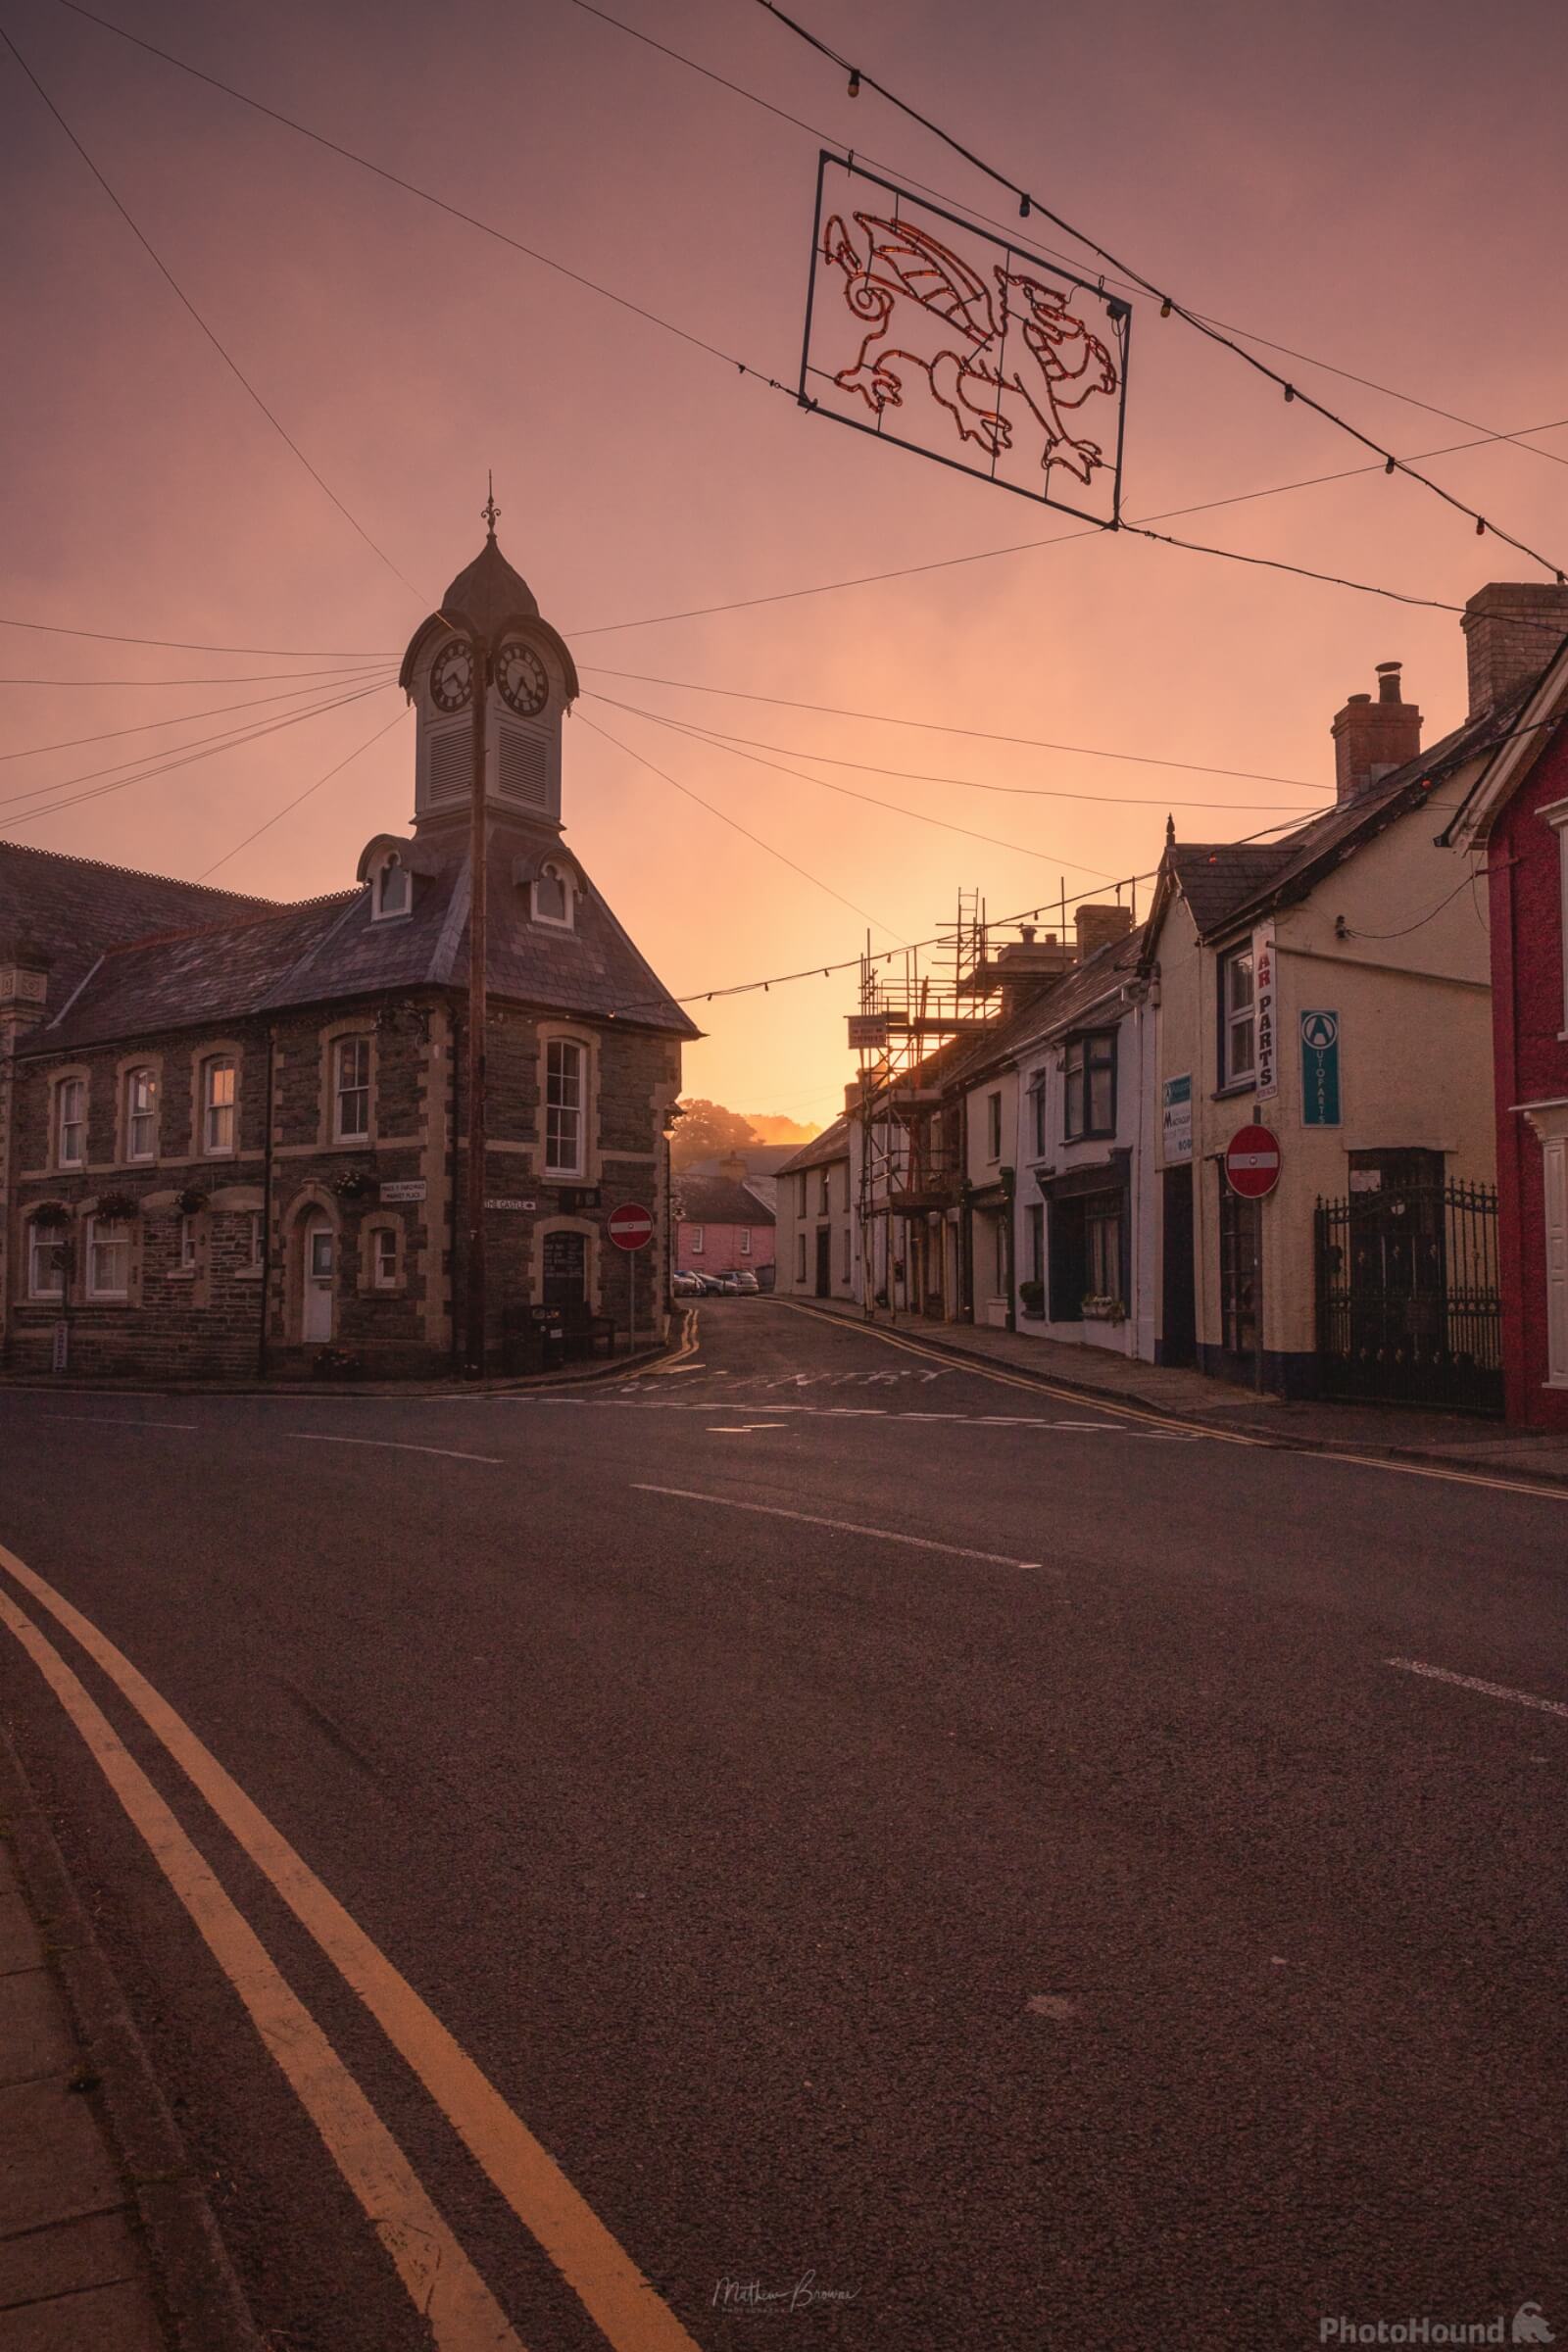 Image of Newcastle Emlyn Market Square by Mathew Browne